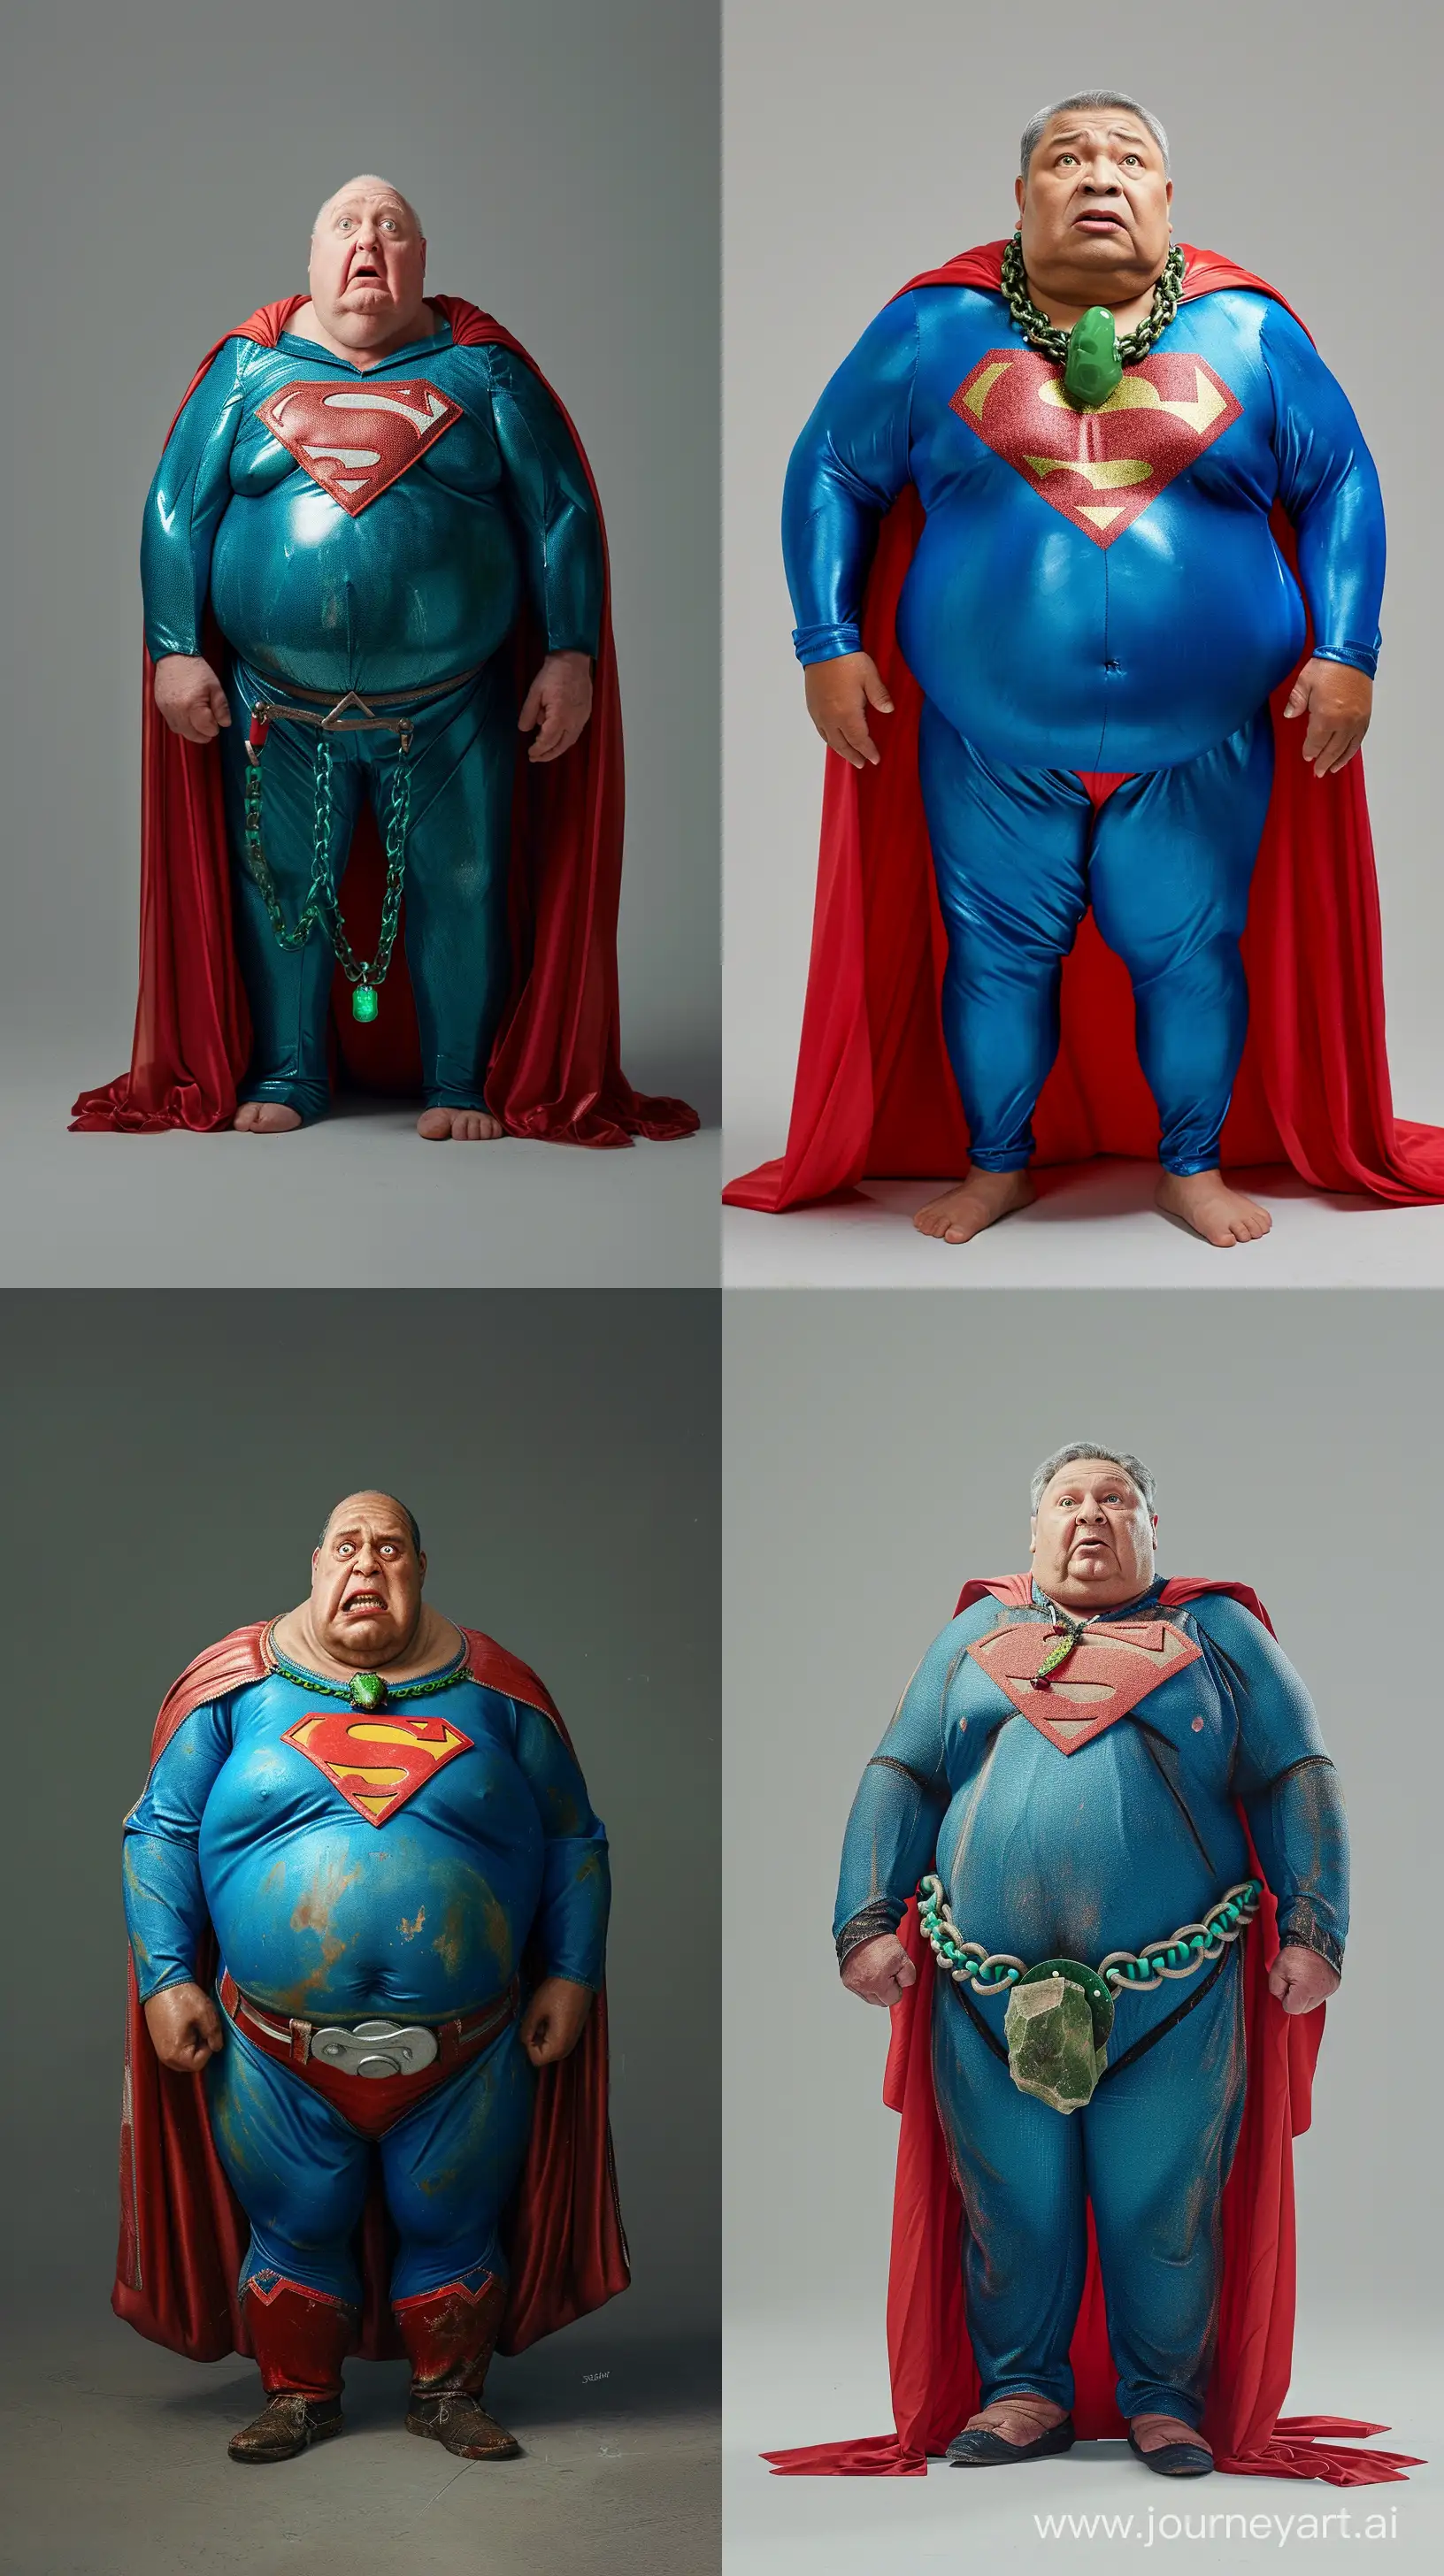 Fearful-70YearOld-Man-in-Bright-Blue-Superman-Costume-with-Red-Cape